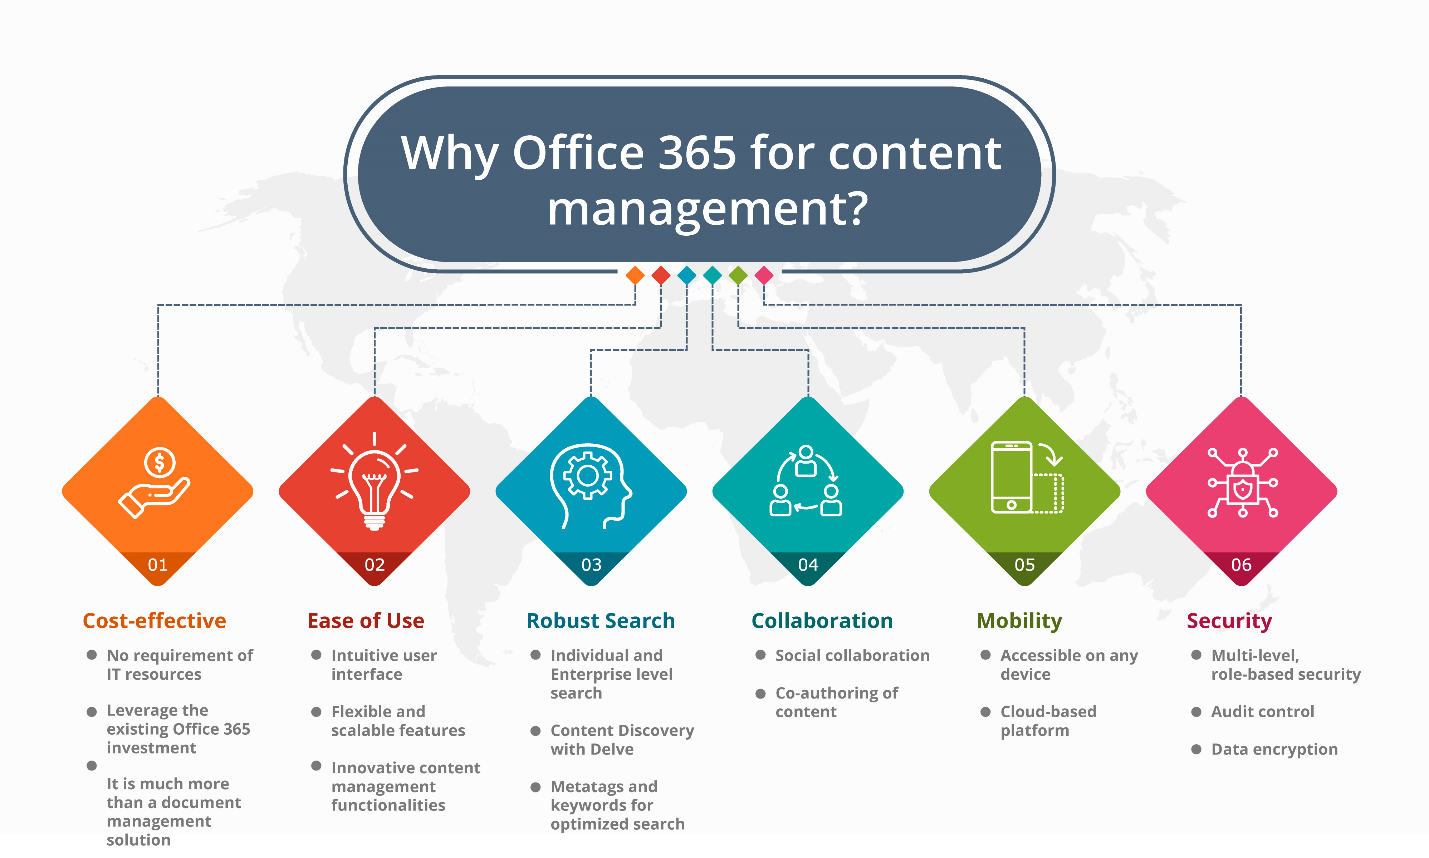 Microsoft Office 365 for Content Management